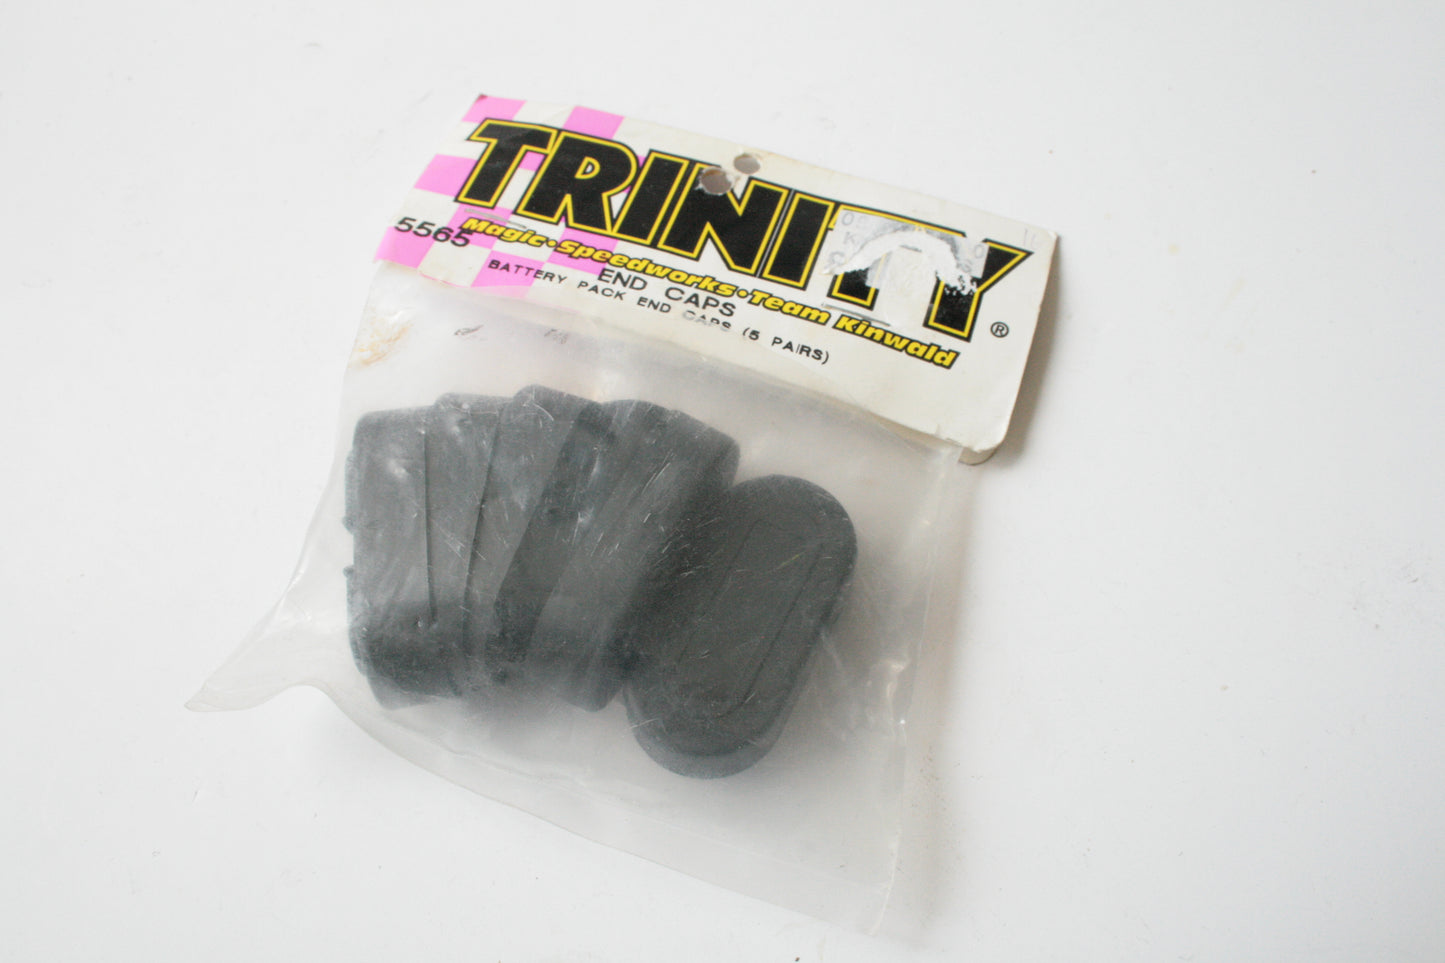 Trinity 5565 Stick Battery Pack End Caps (3Pairs) Incomplete